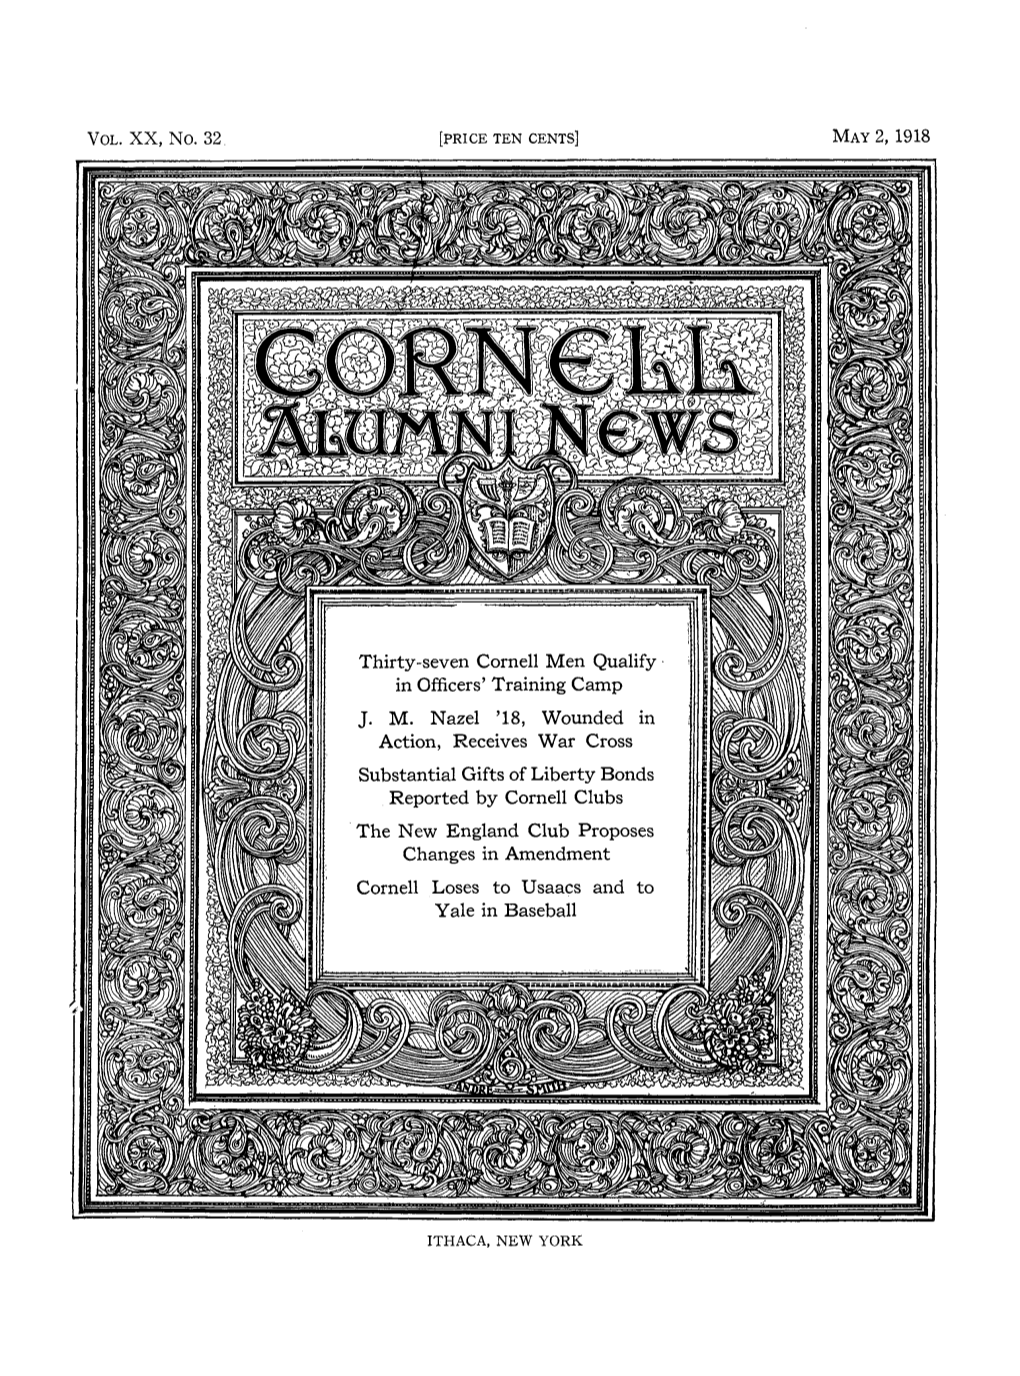 MAY 2, 1918 Thirty-Seven Cornell Men Qualify in Officers' Training